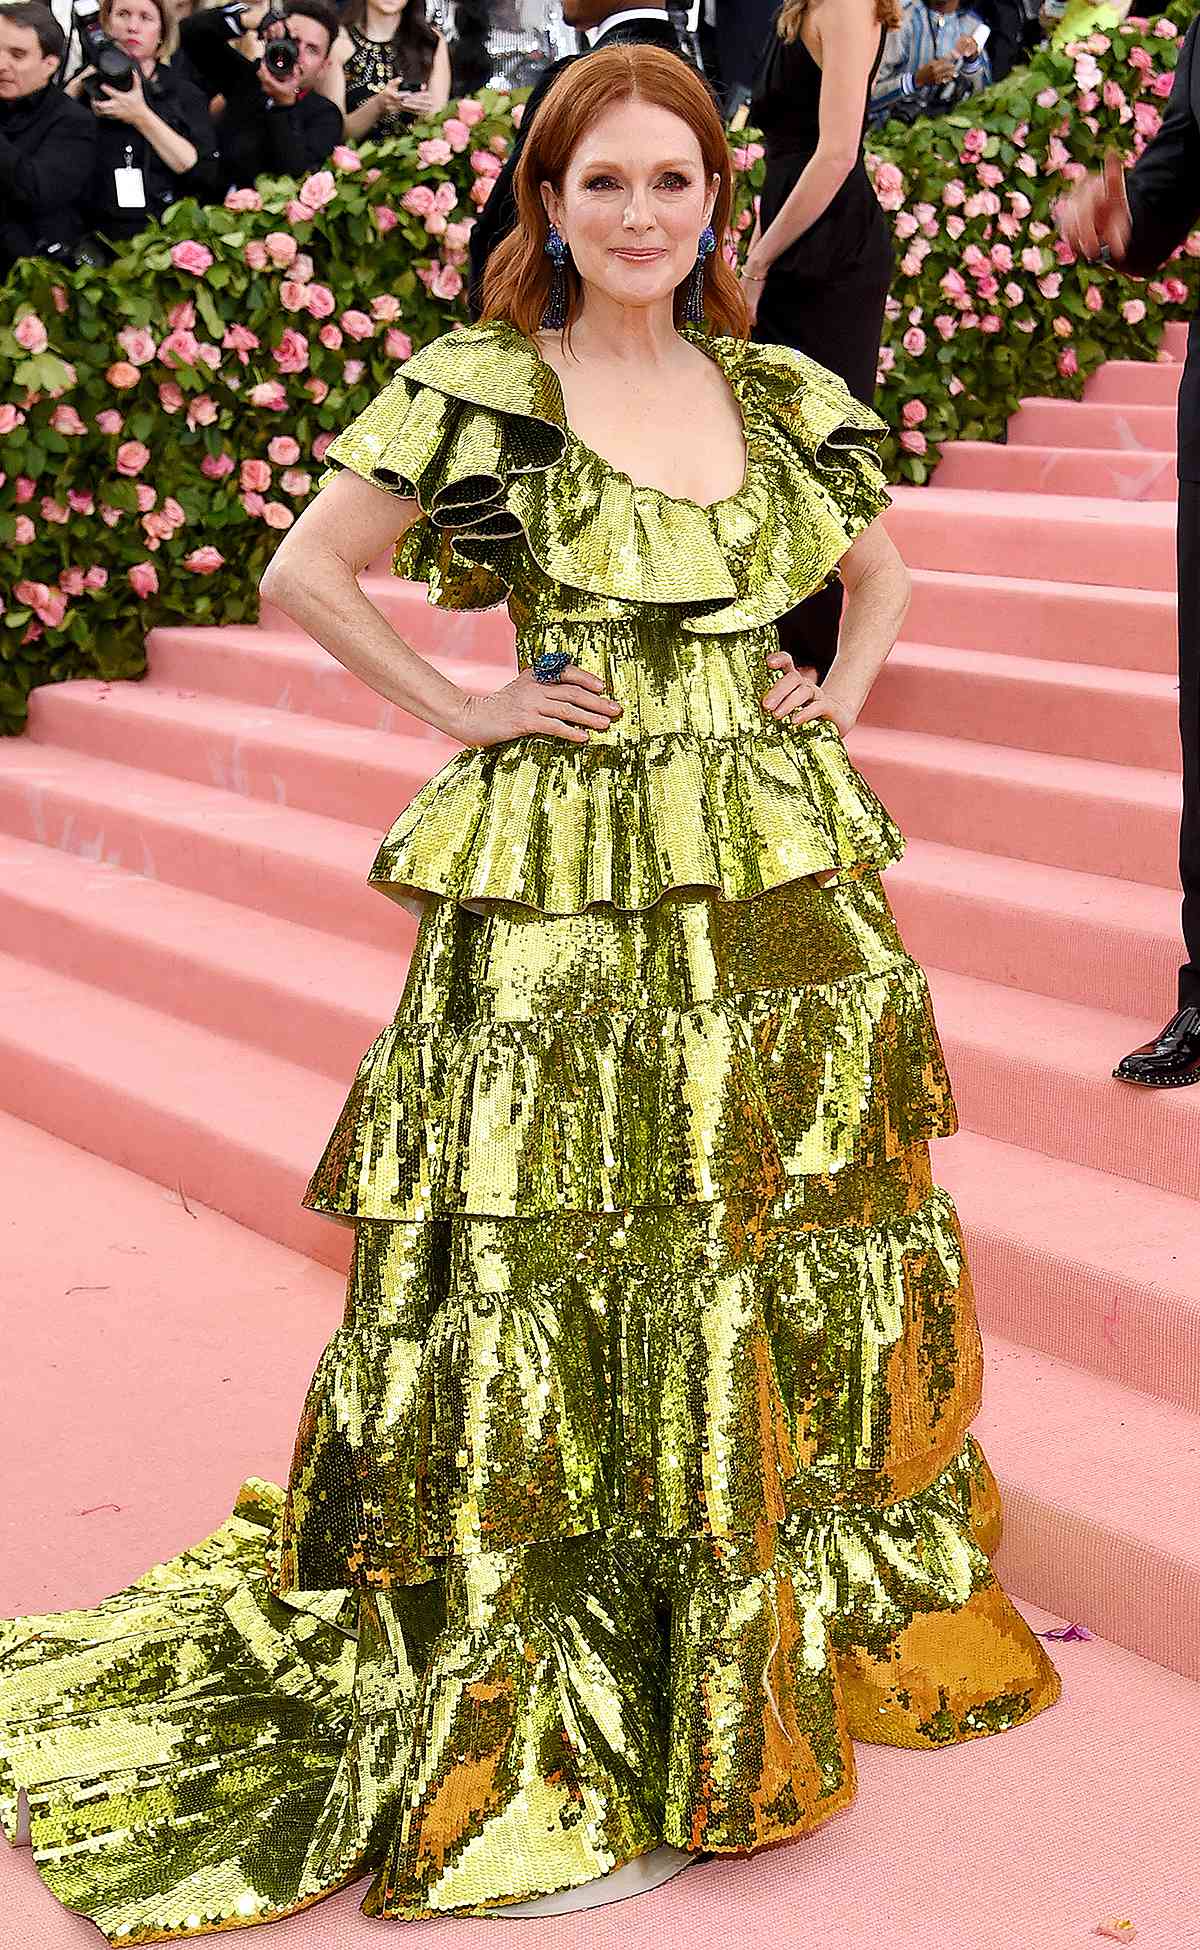 NEW YORK, NEW YORK - MAY 06: Julianne Moore attends The 2019 Met Gala Celebrating Camp: Notes on Fashion at Metropolitan Museum of Art on May 06, 2019 in New York City. (Photo by Jamie McCarthy/Getty Images)